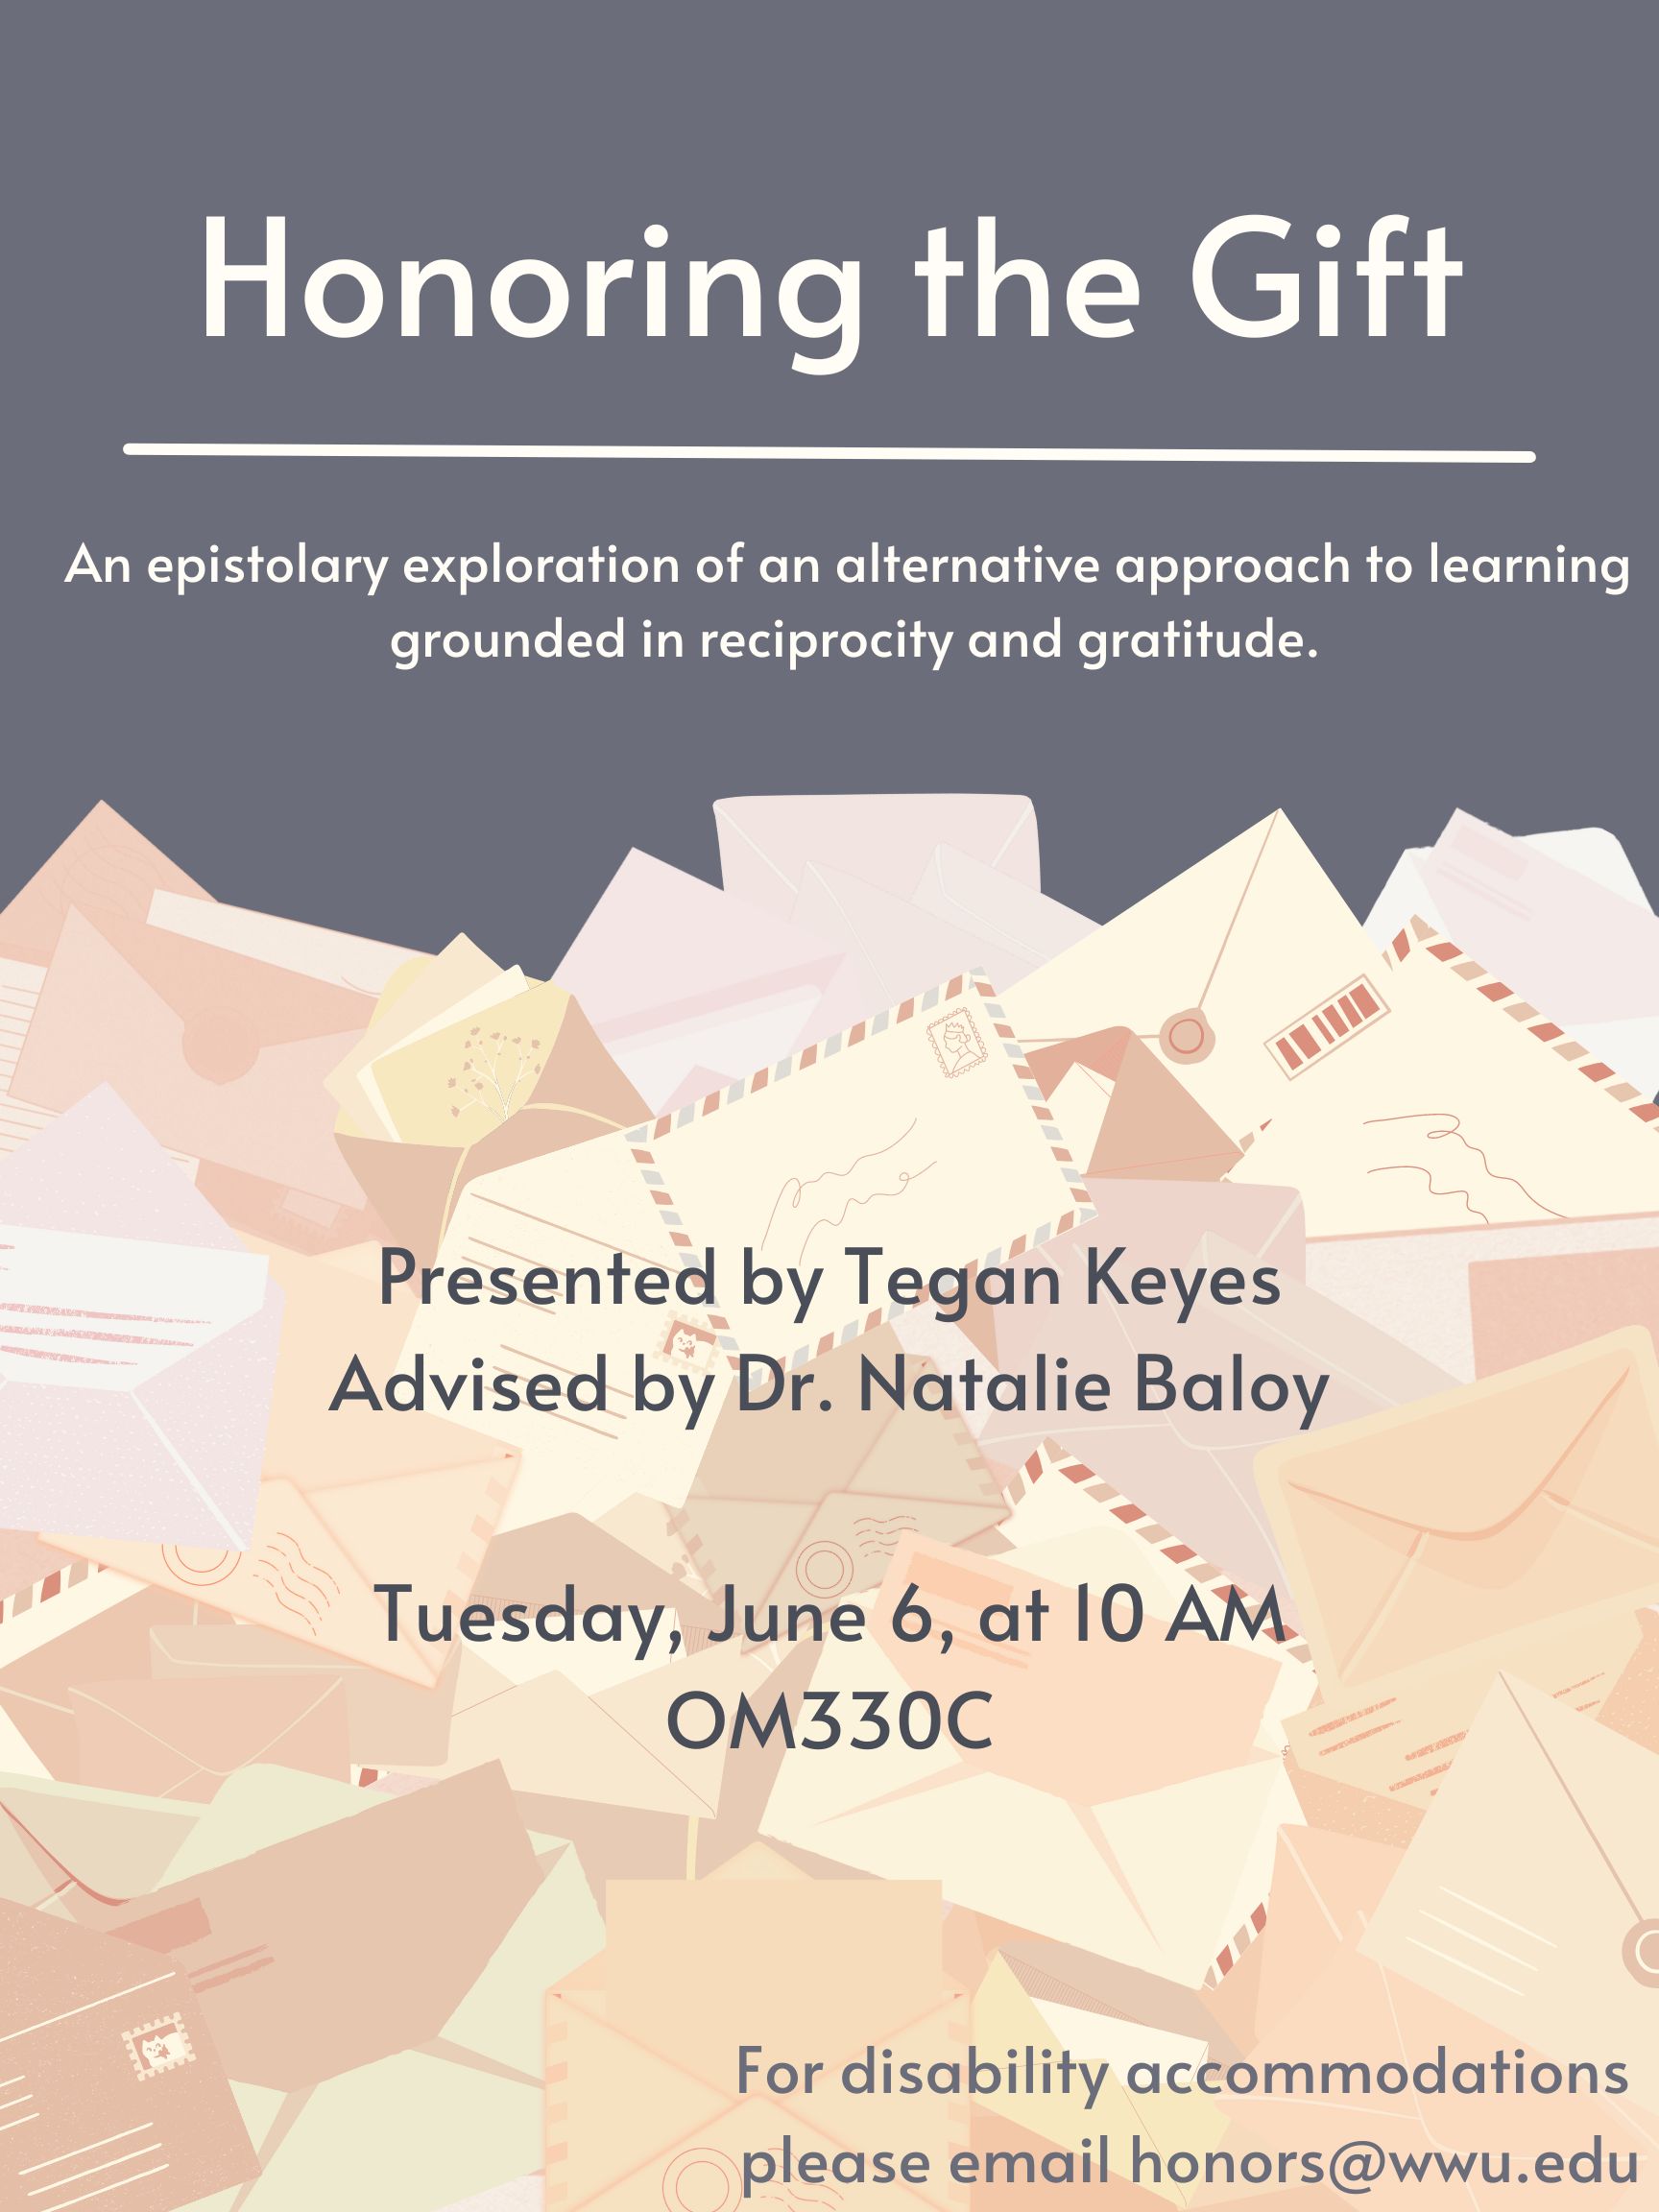 A pile of half-opened envelopes and letters against a dark gray background, with white and gray text. The text reads “Honoring the Gift: An epistolary exploration of an alternative approach to learning grounded in reciprocity and gratitude. Presented by Tegan Keyes. Advised by Dr. Natalie Baloy. Tuesday, June 6, at 10AM. OM330C. For disability accommodations, please email honors@wwu.edu.”